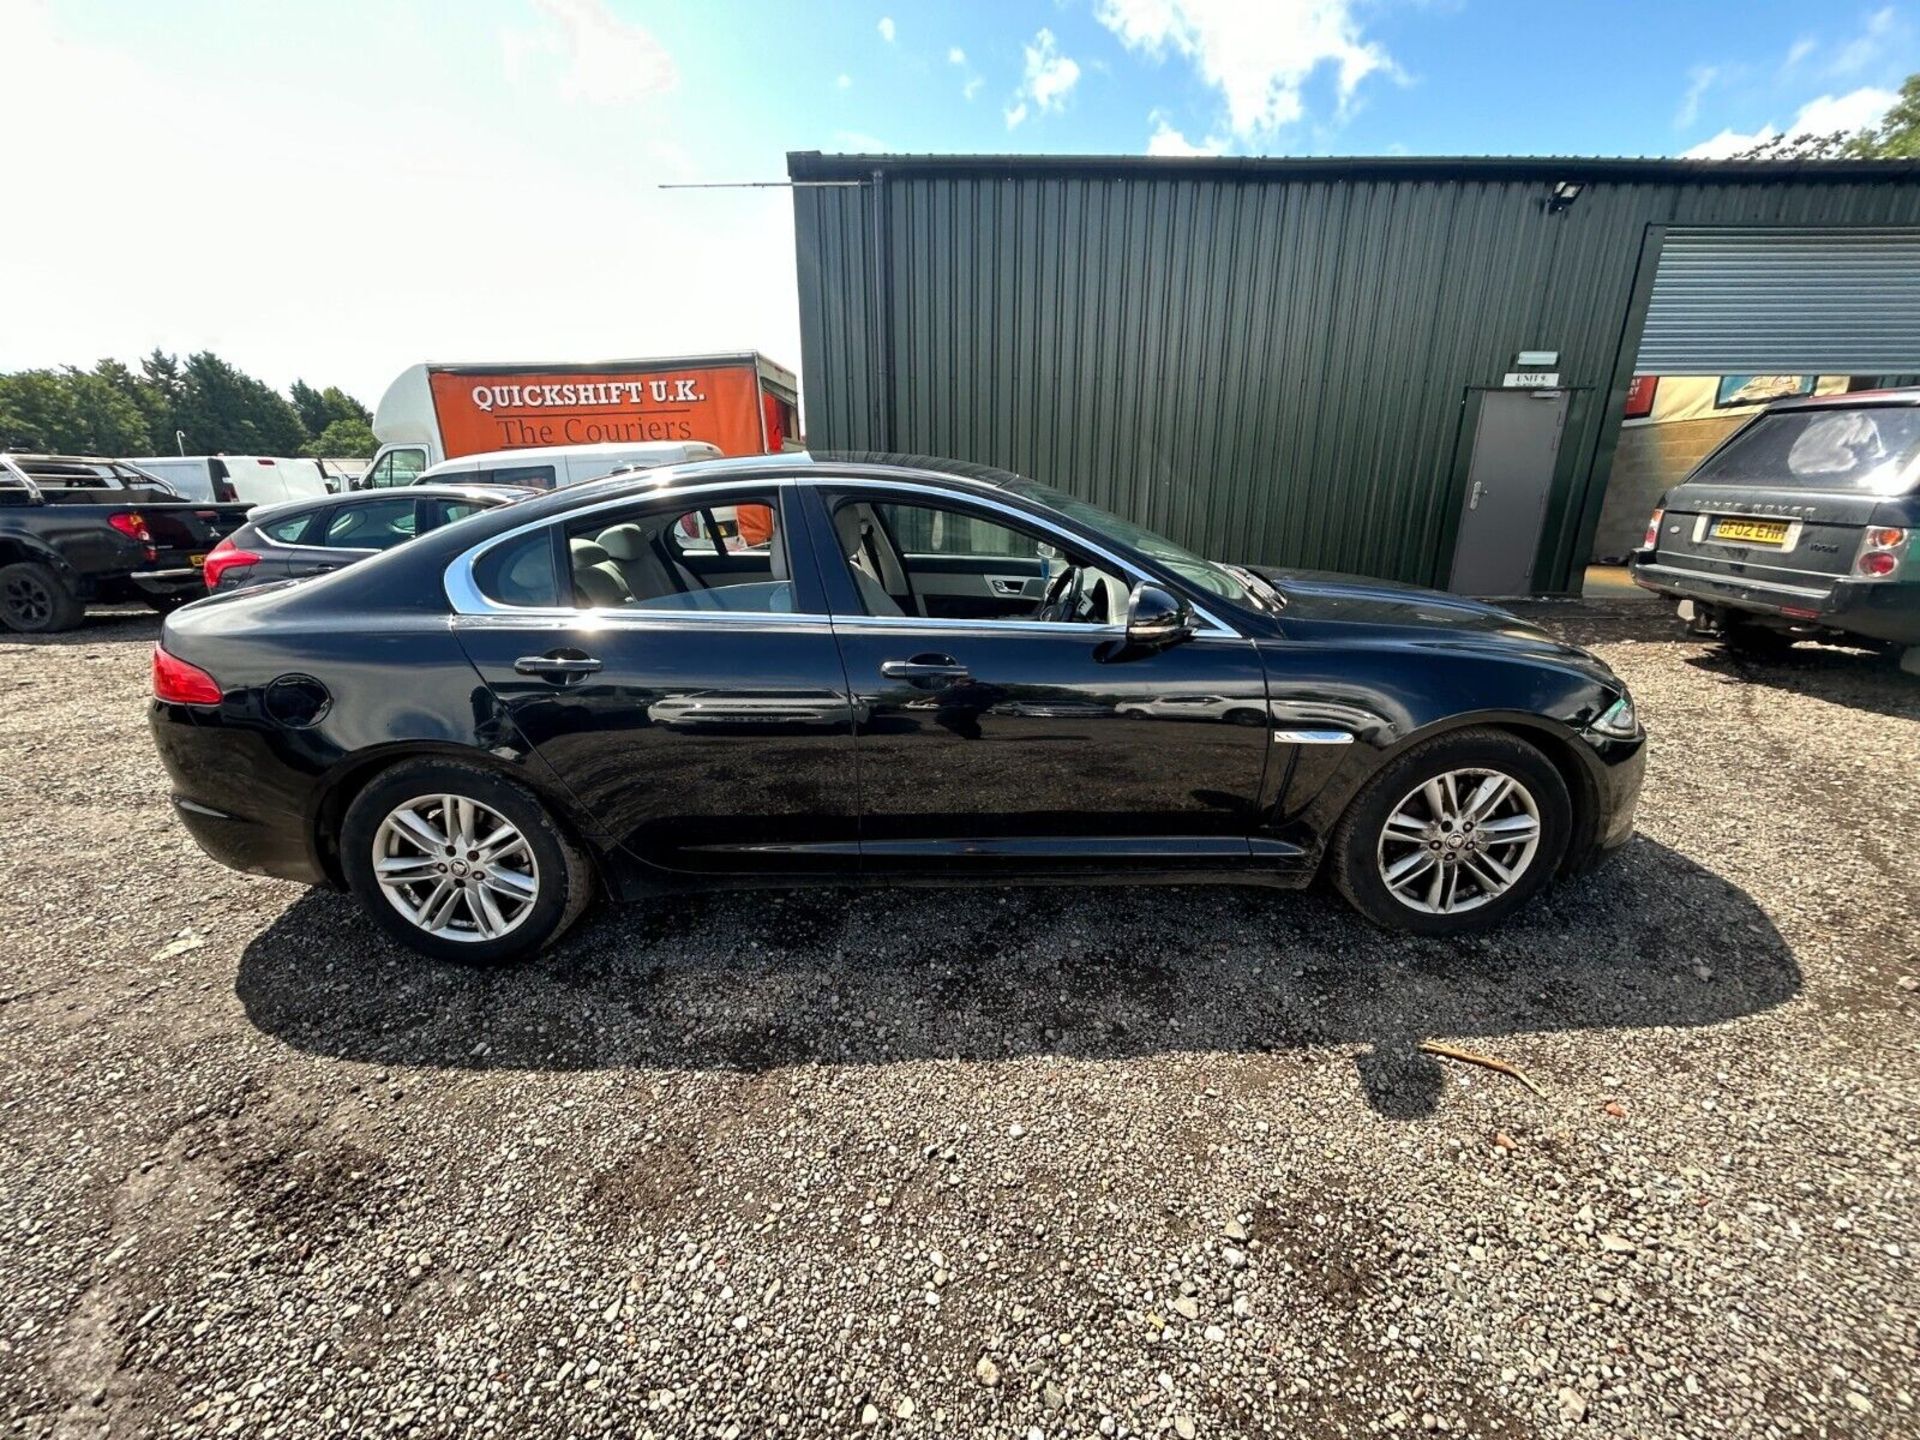 2012 JAGUAR XF LUXURY AUTOMATIC SWB SALOON 5 DOOR STARTS AND DRIVES - Image 4 of 15